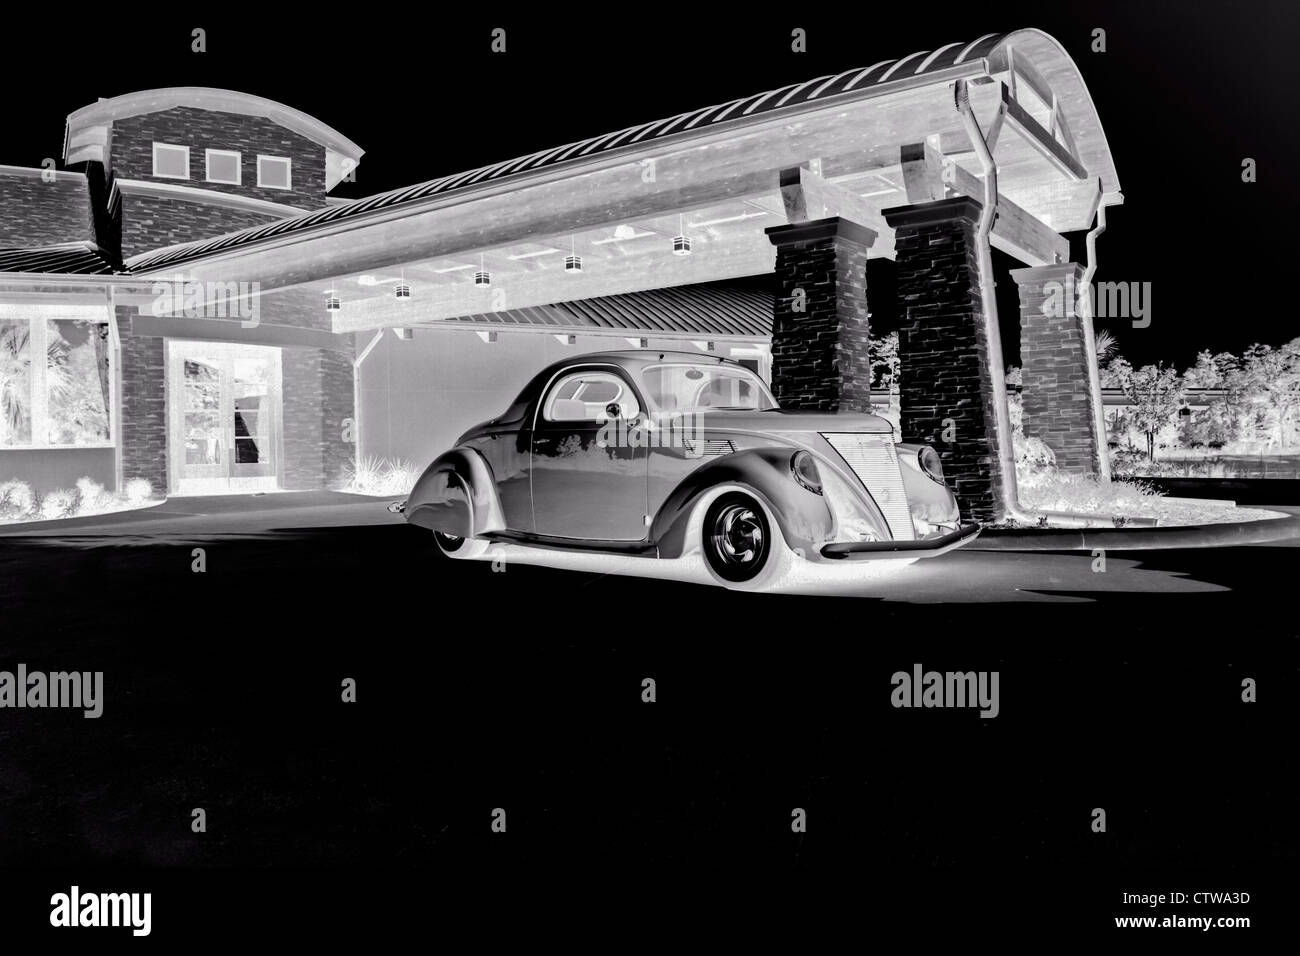 Black and white negative image of classic car and restaurant in The Woodlands, Texas. Stock Photo